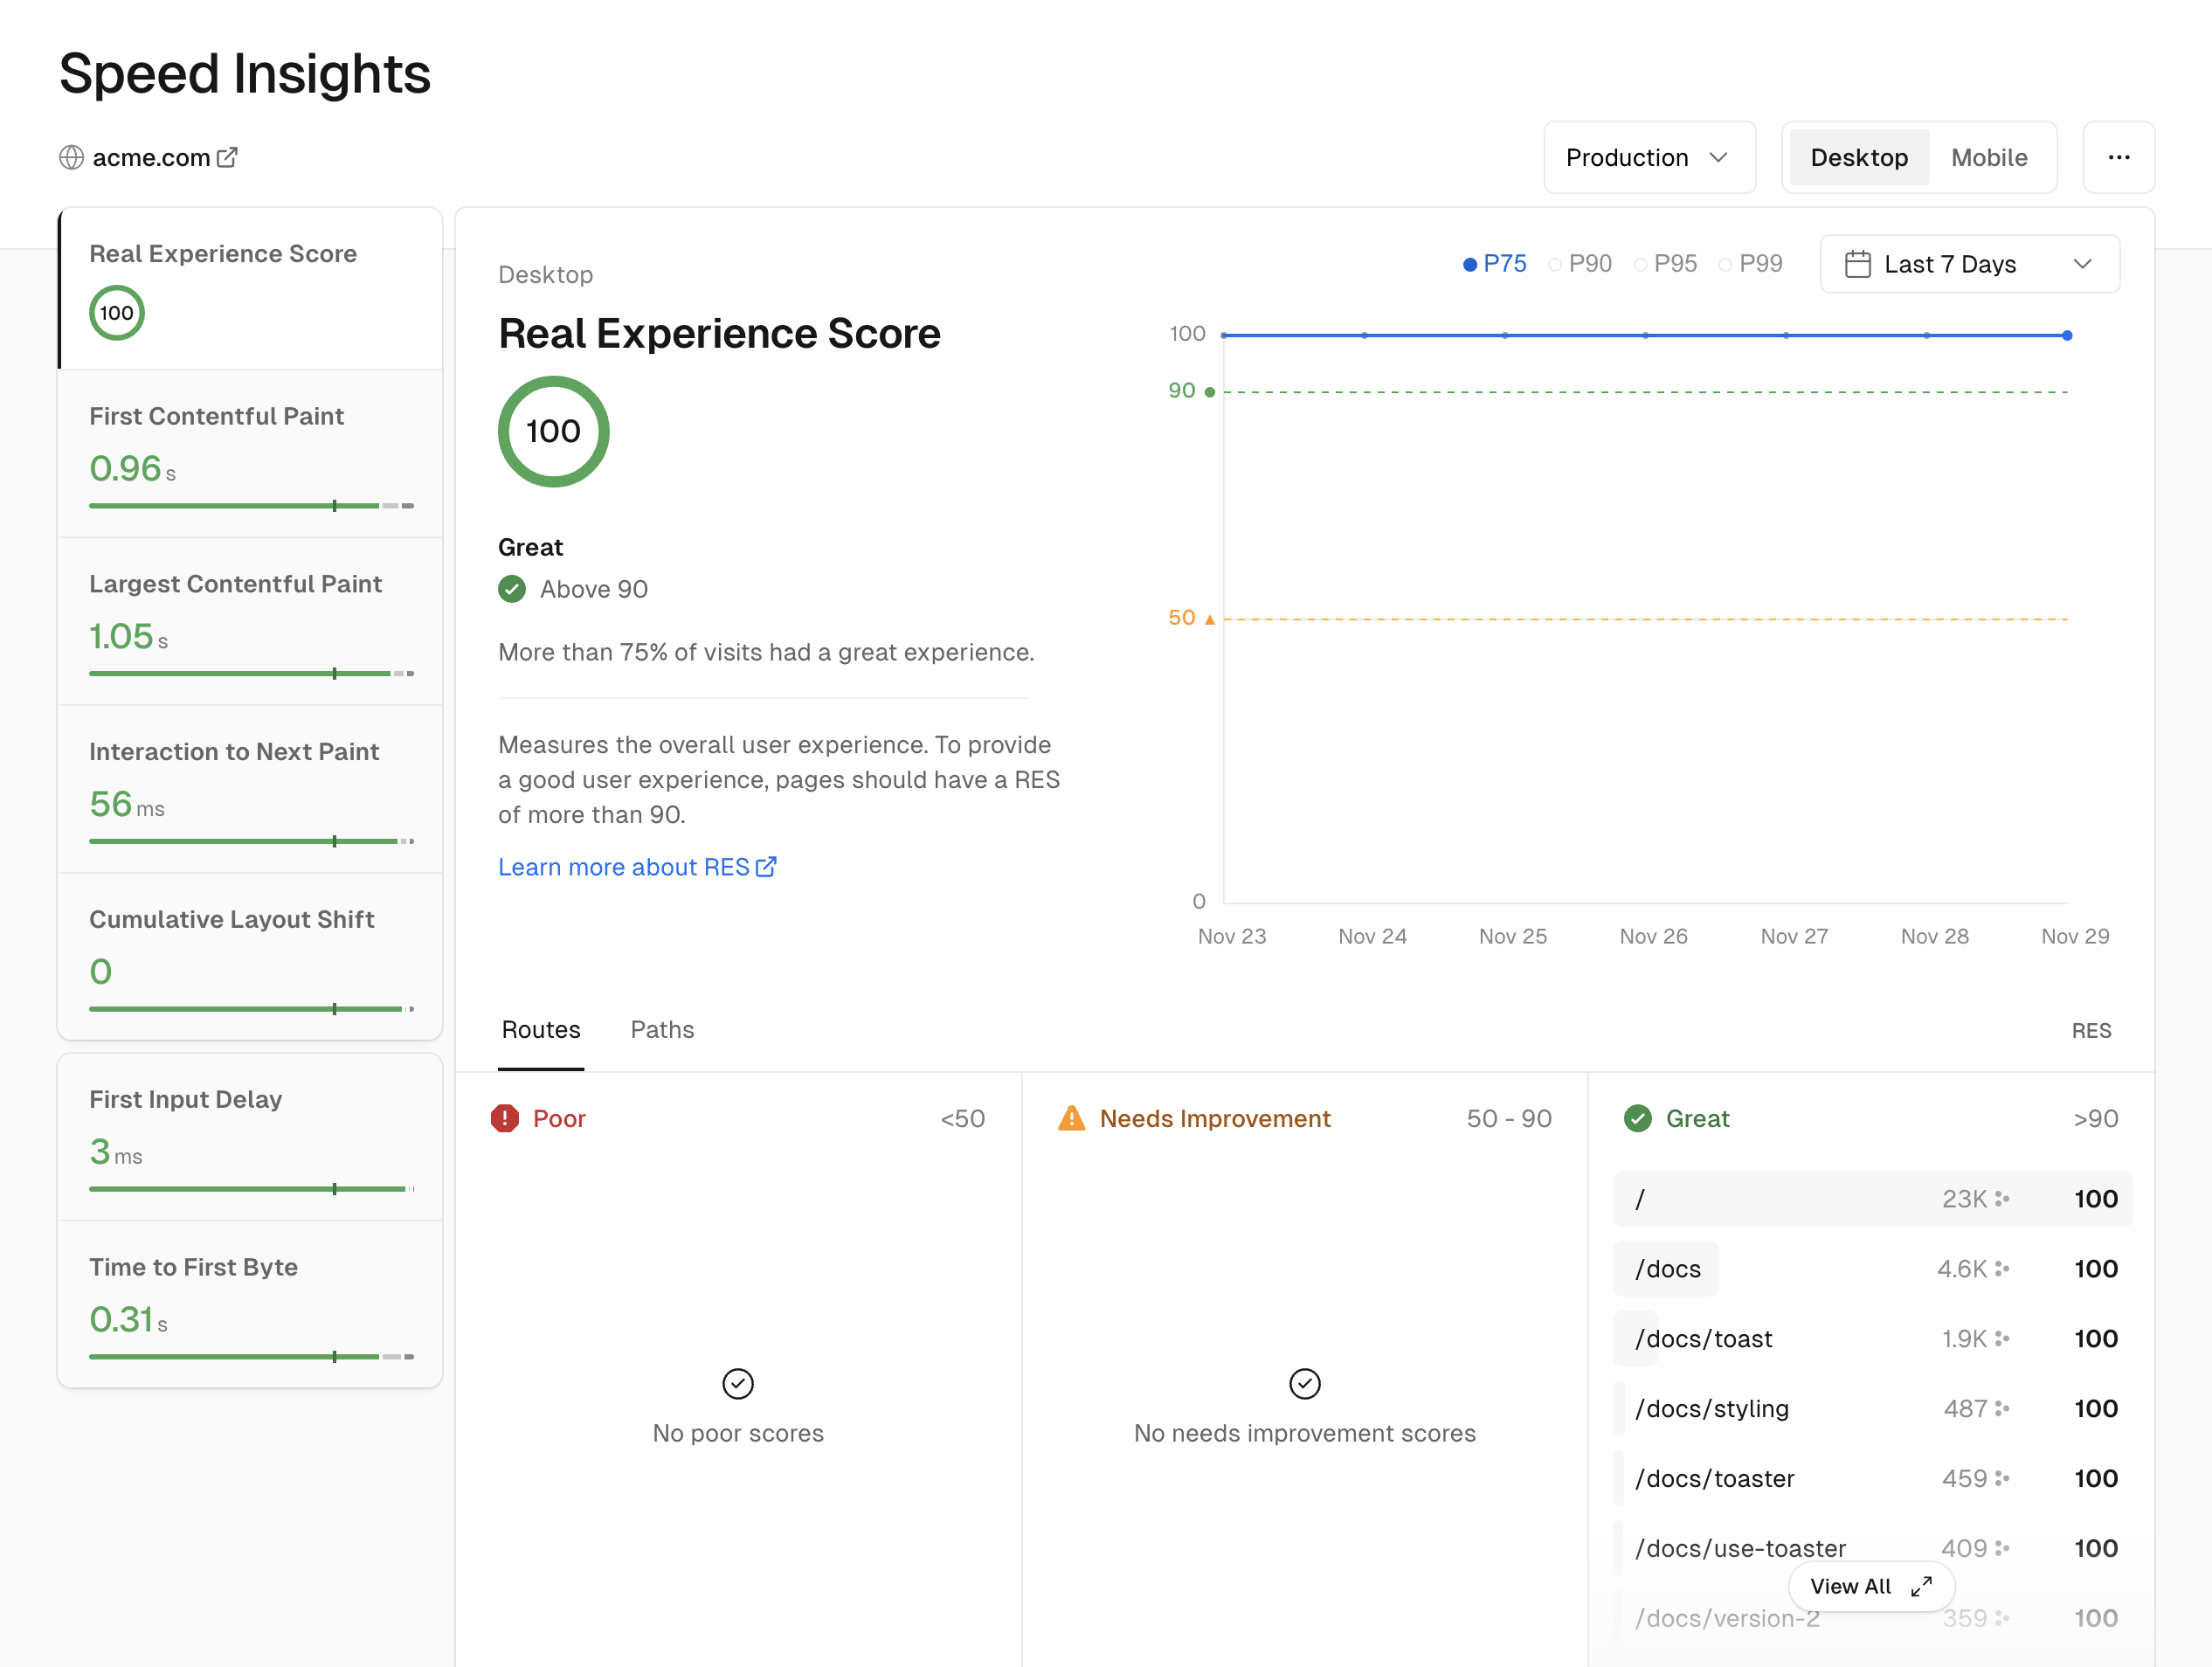 A snapshot of the Speed Insights tab from the project view.